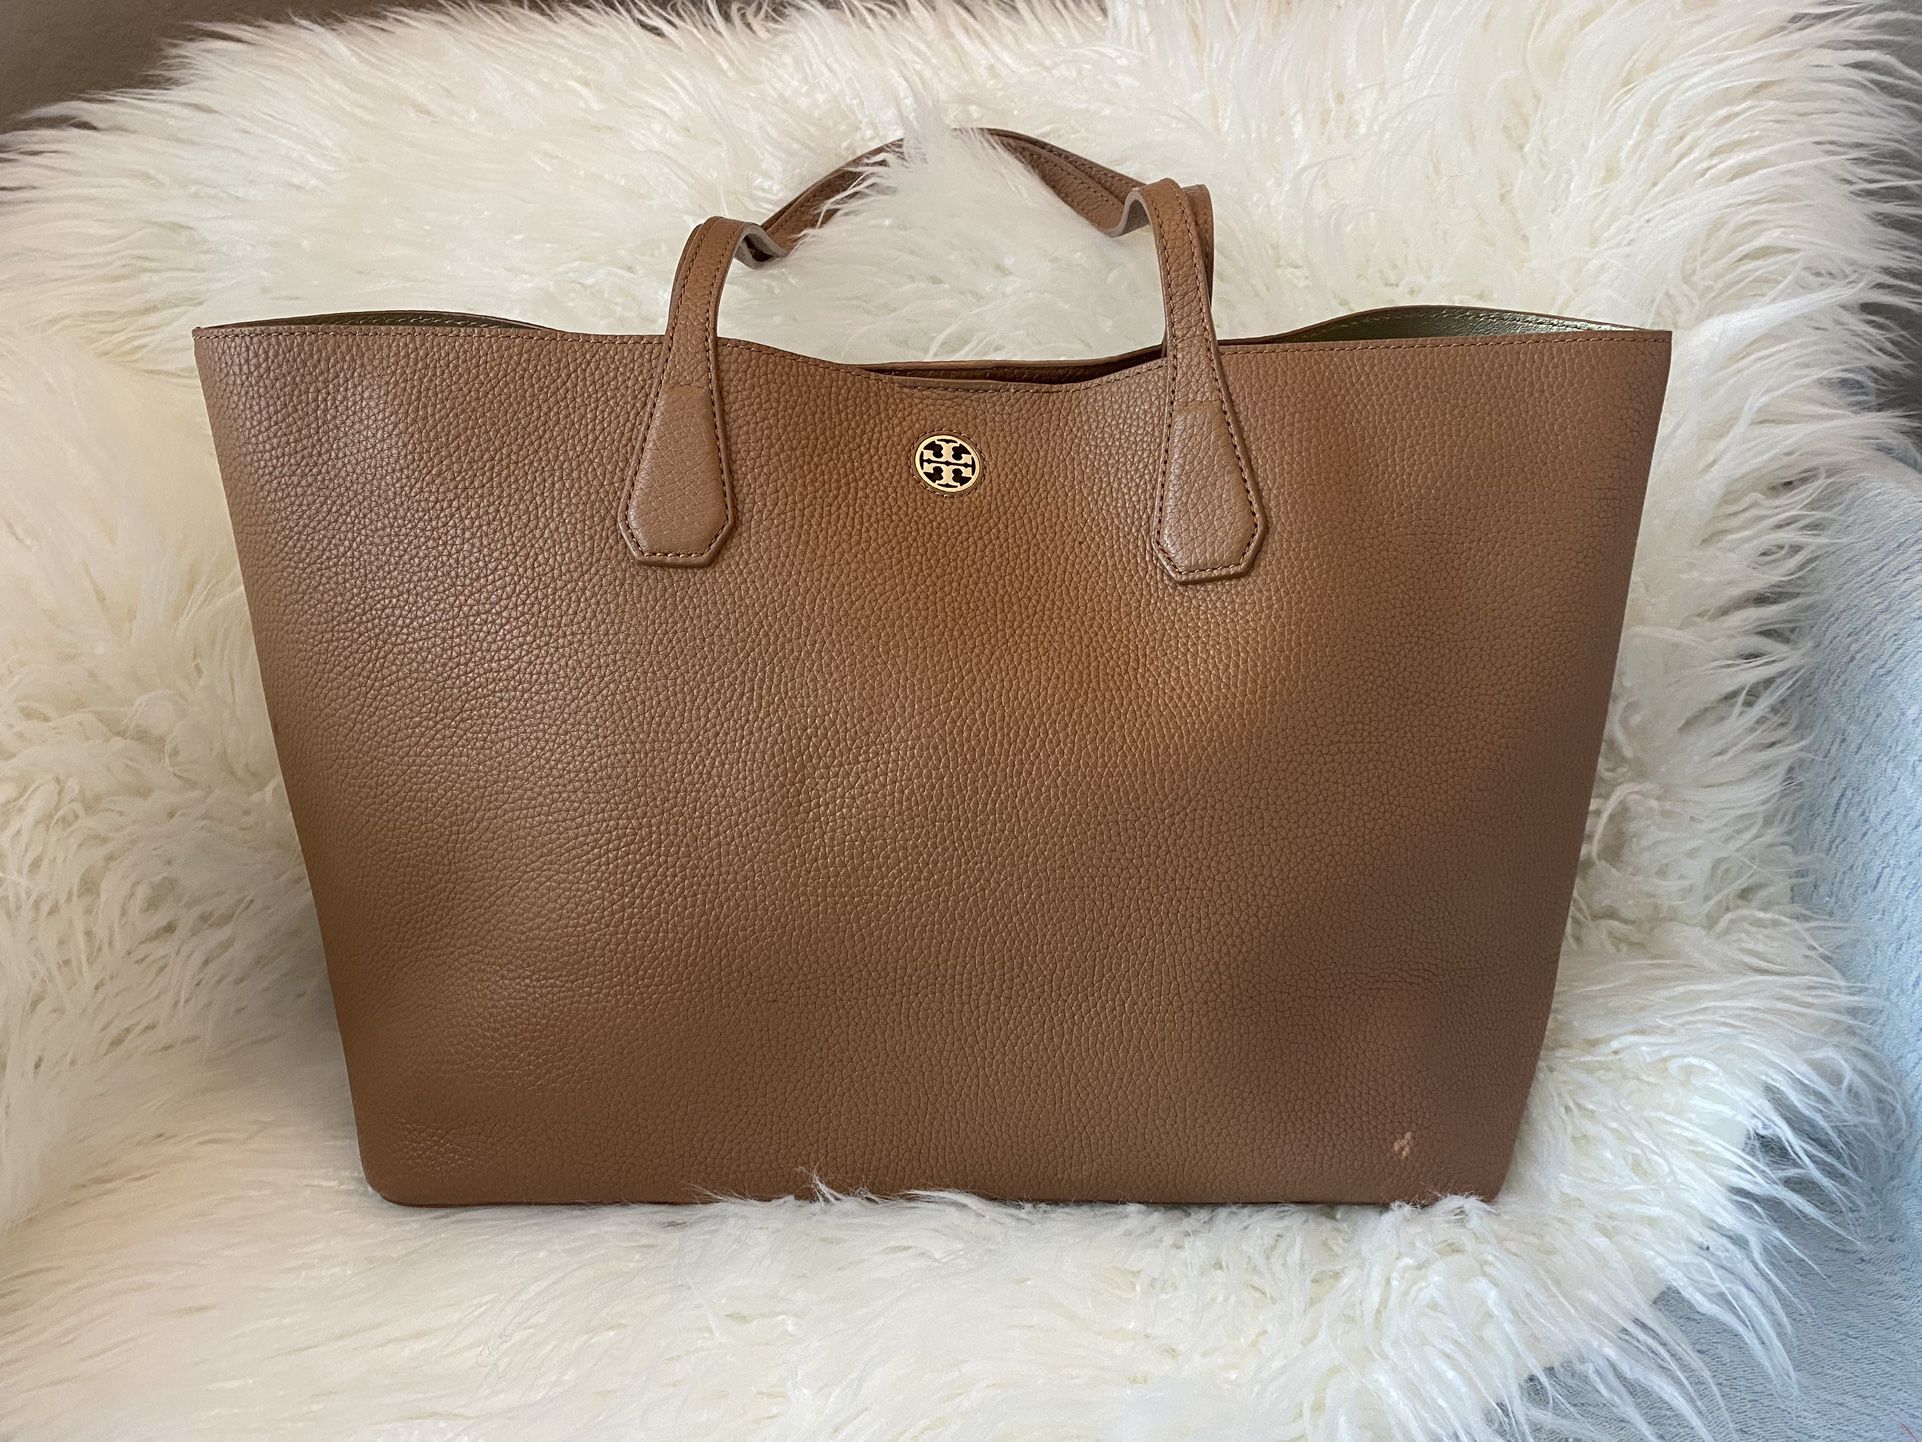 Tory Burch Pebbled Leather Tote - Caramel Brown